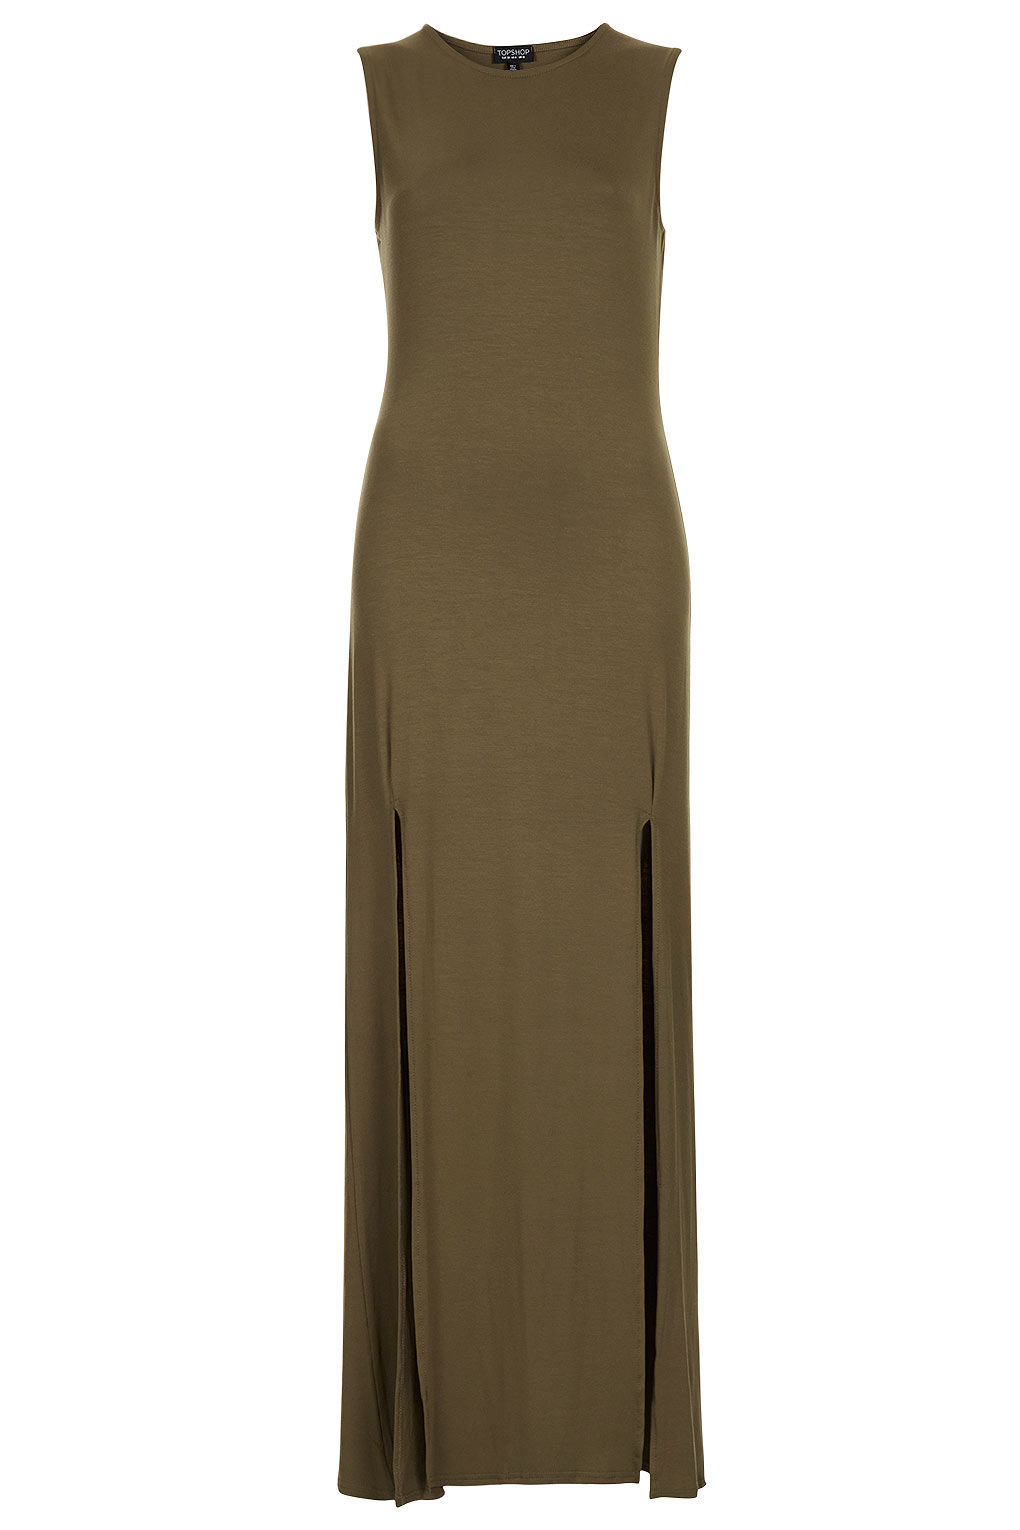 Lyst - Topshop Double Split Maxi Dress in Natural